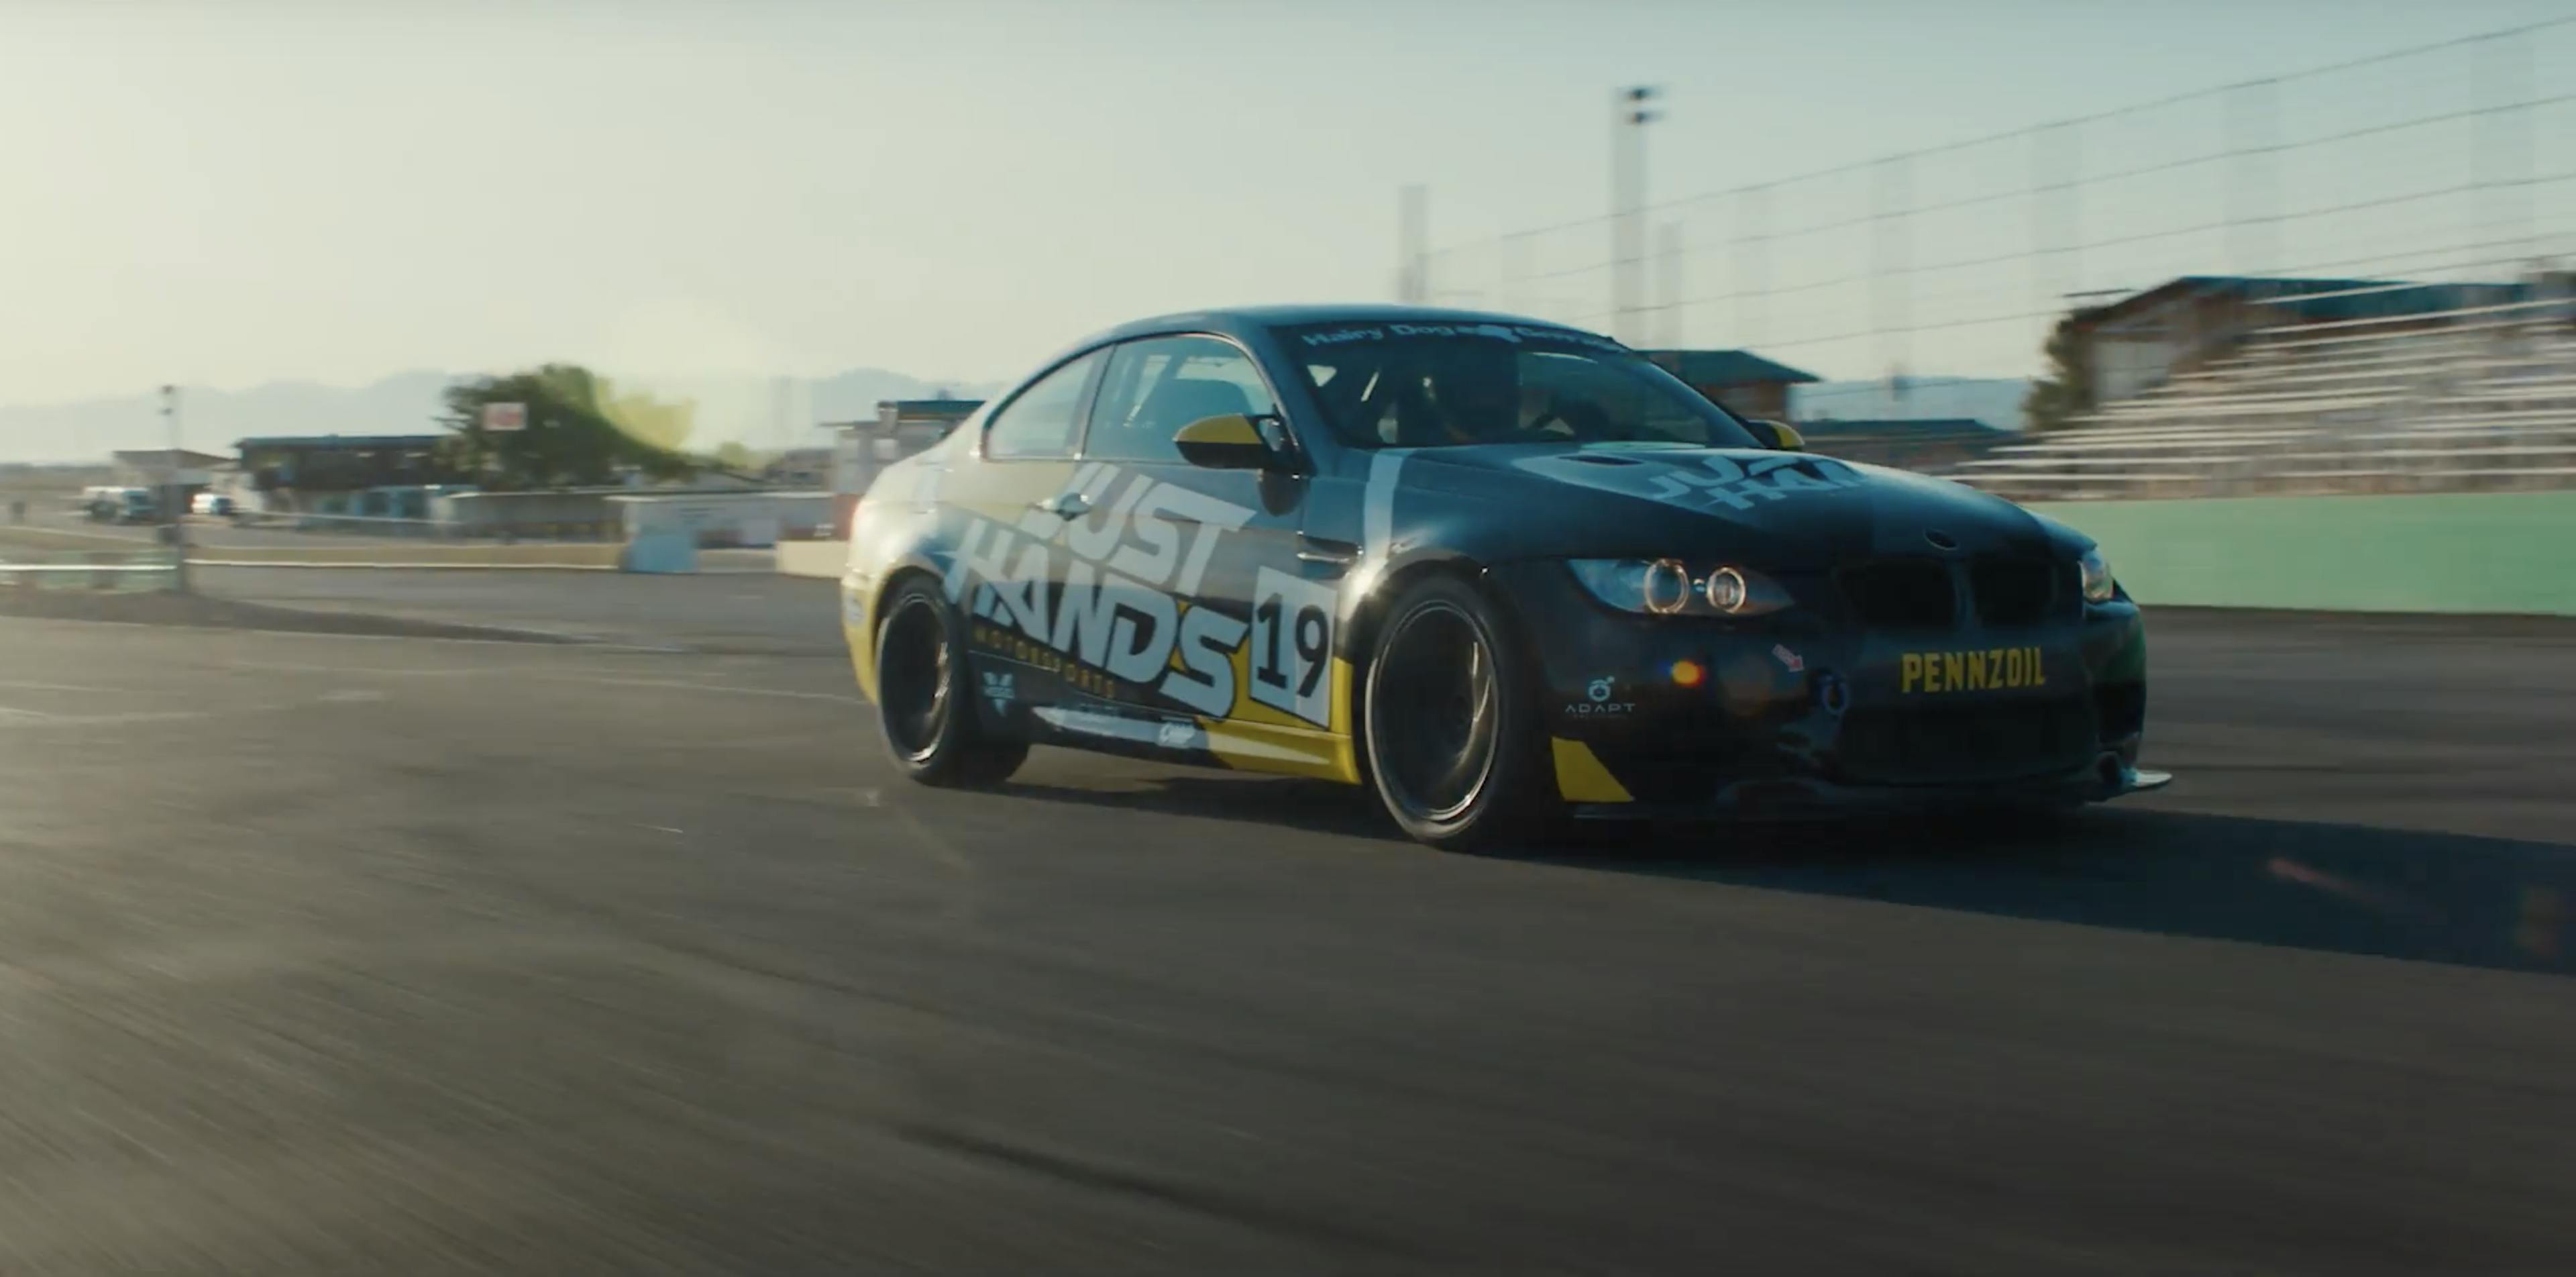 A racecar zooms down the track